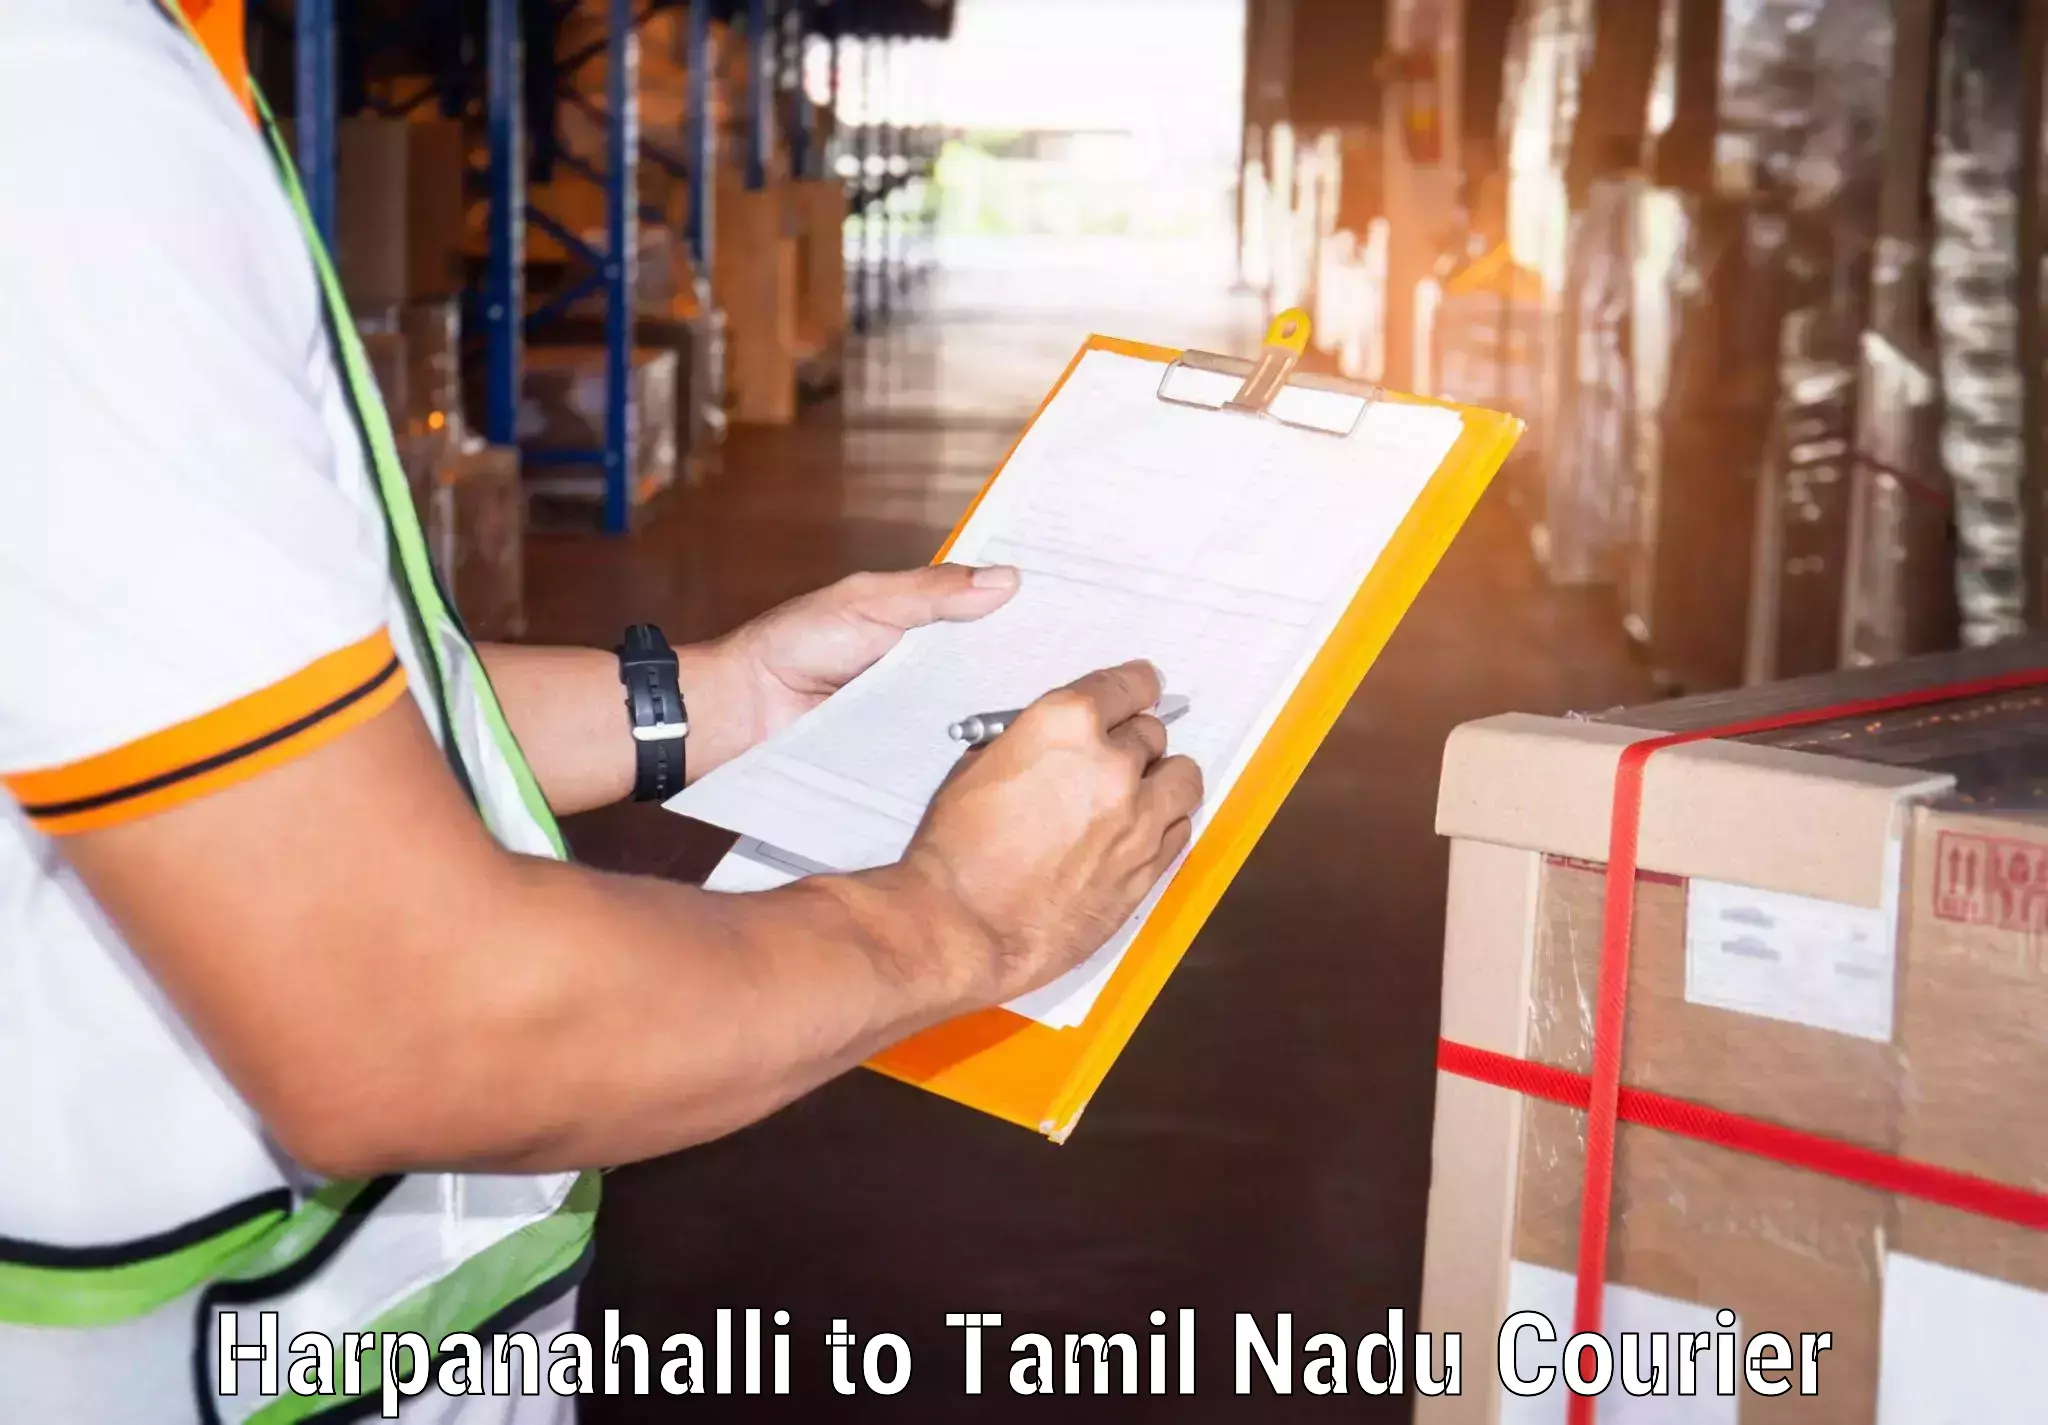 24/7 courier service in Harpanahalli to Tamil Nadu